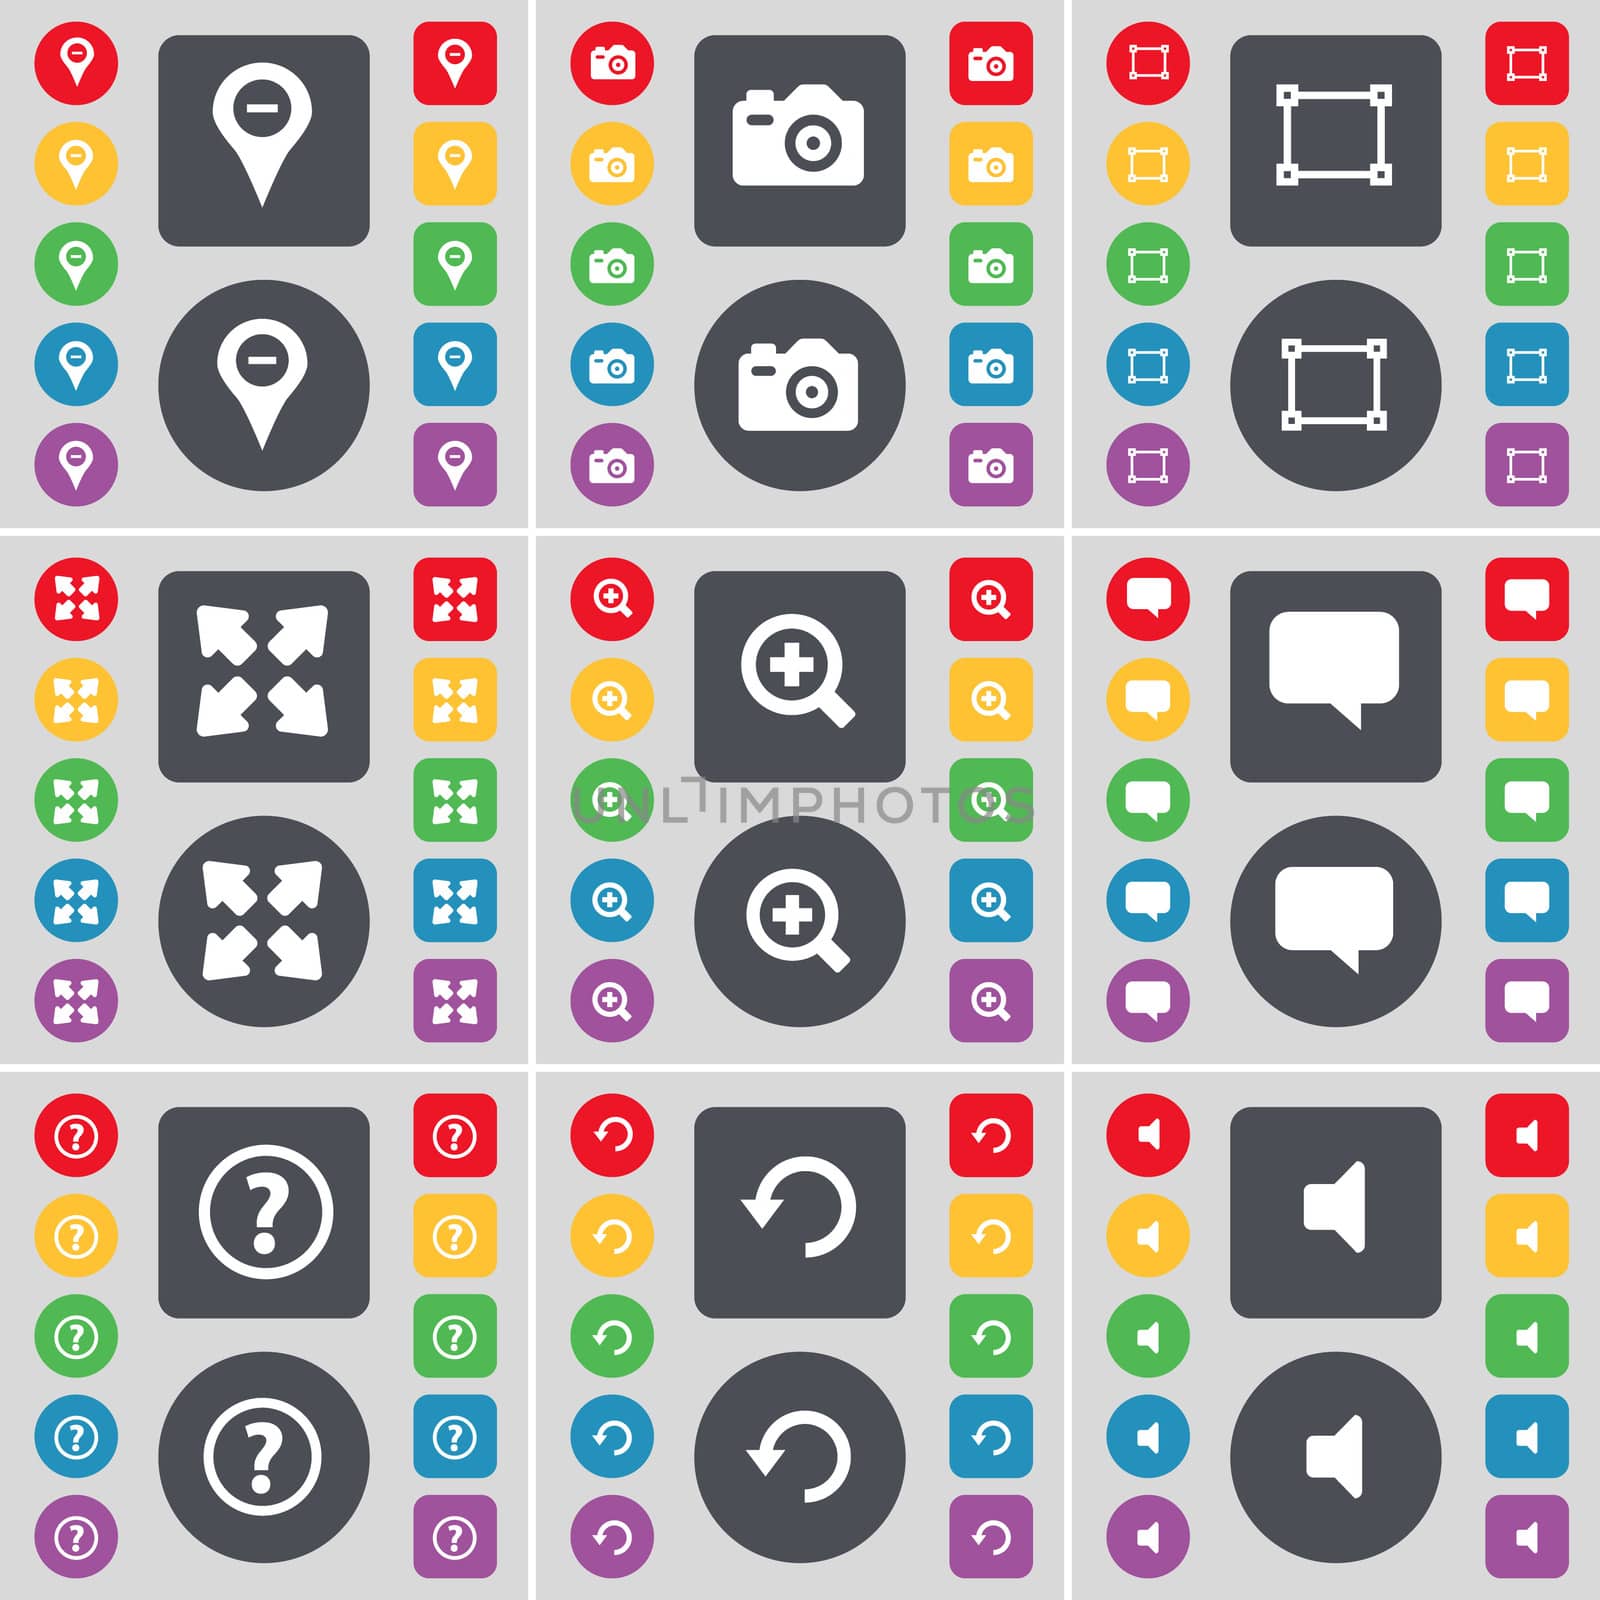 Checkpoint, Camera, Frame, Full screen, Magnifing glass, Chat bubble, Question mark, Reload, Sound icon symbol. A large set of flat, colored buttons for your design.  by serhii_lohvyniuk